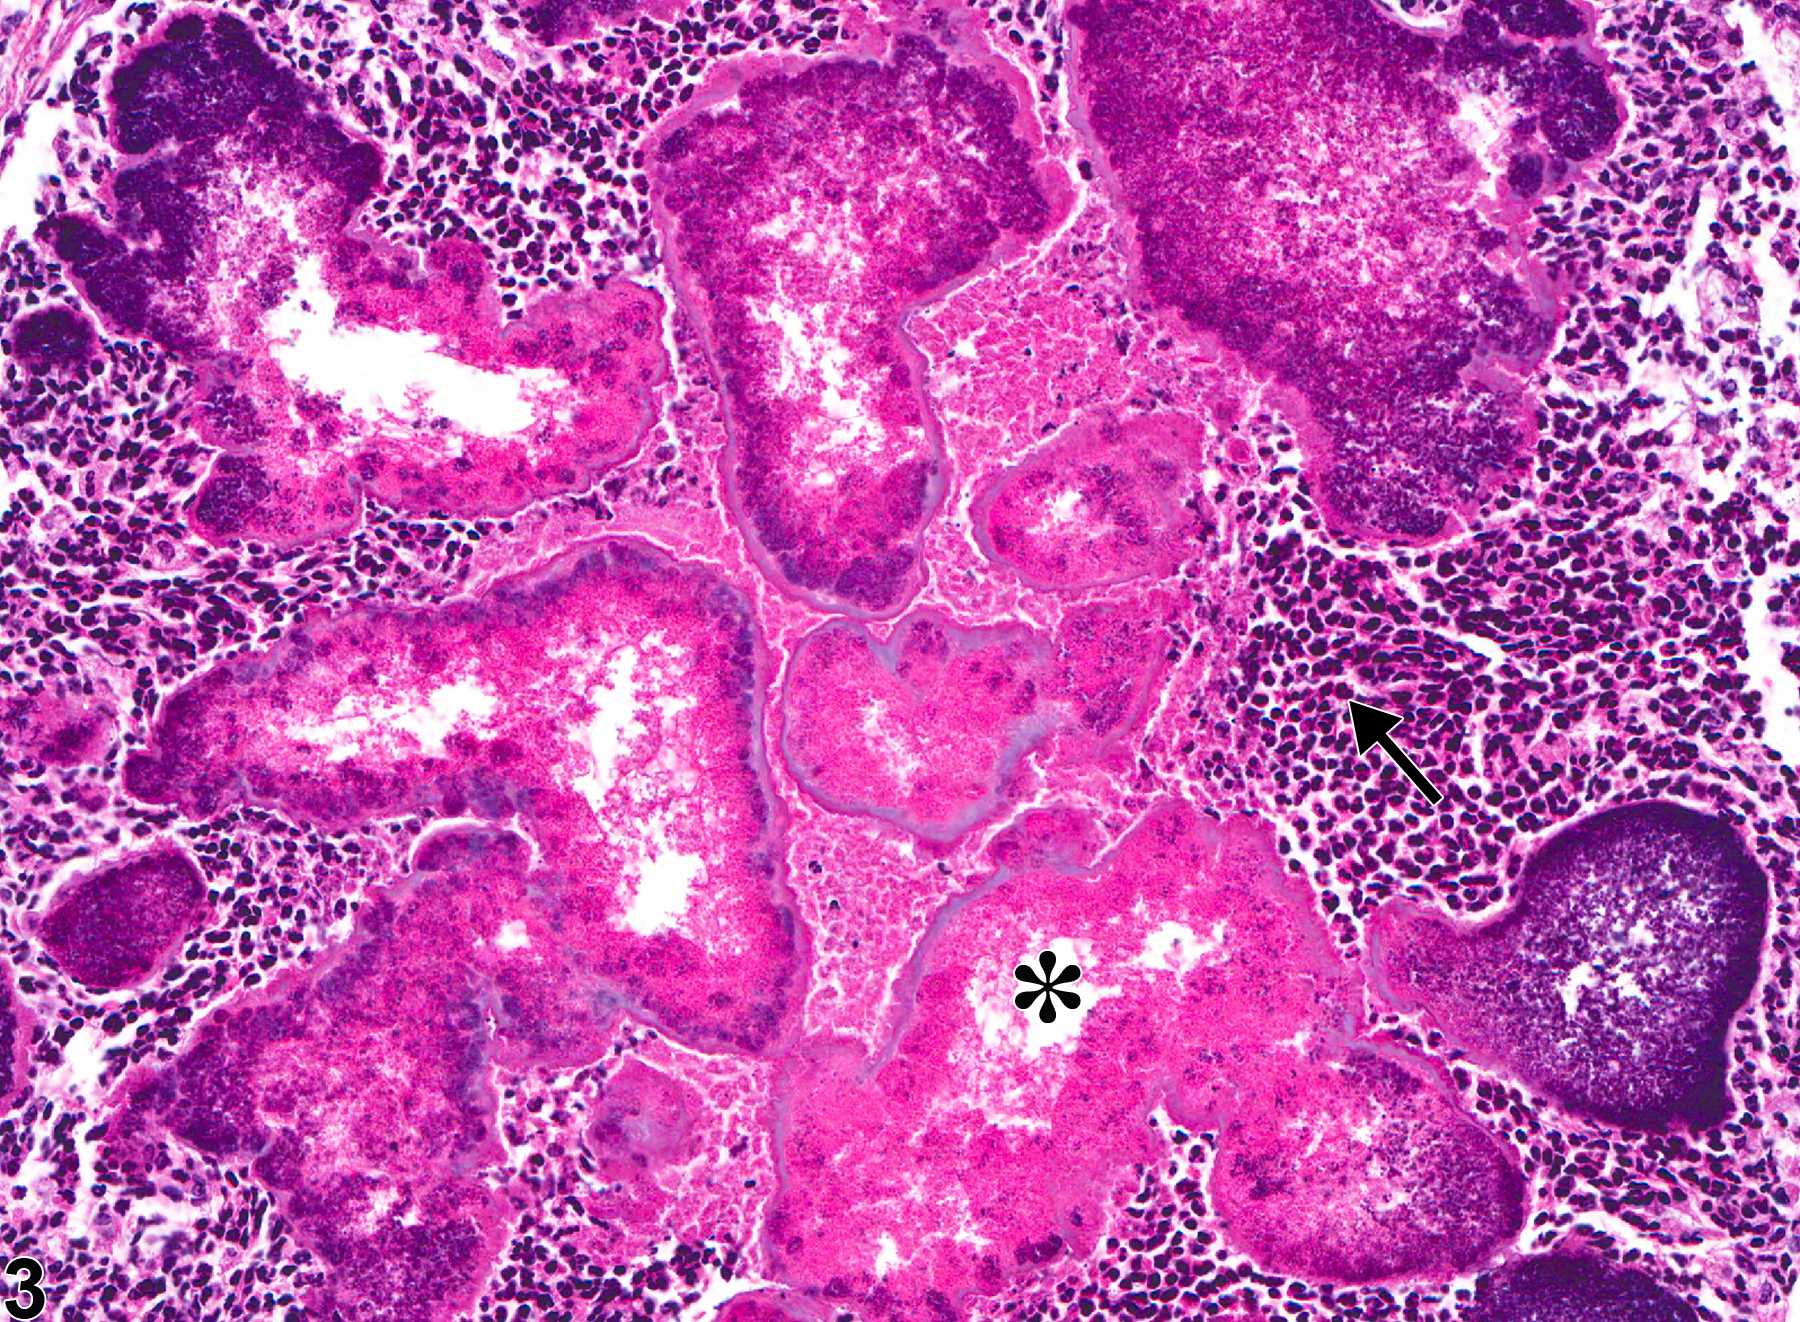 Image of inflammation in the Harderian gland from a male B6C3F1 mouse in a chronic study